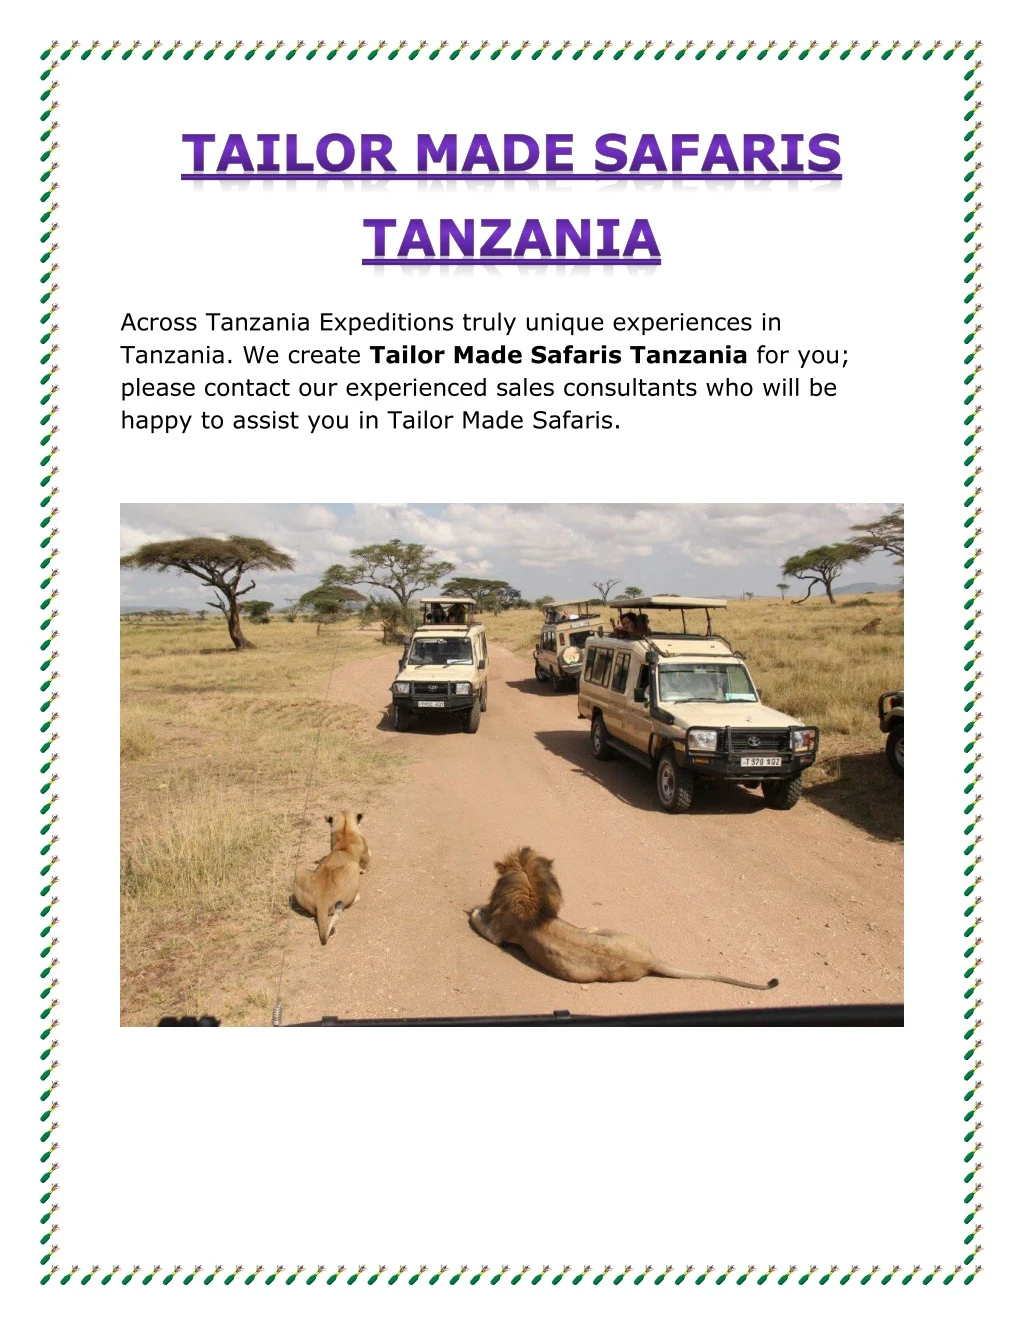 across tanzania expeditions truly unique n.